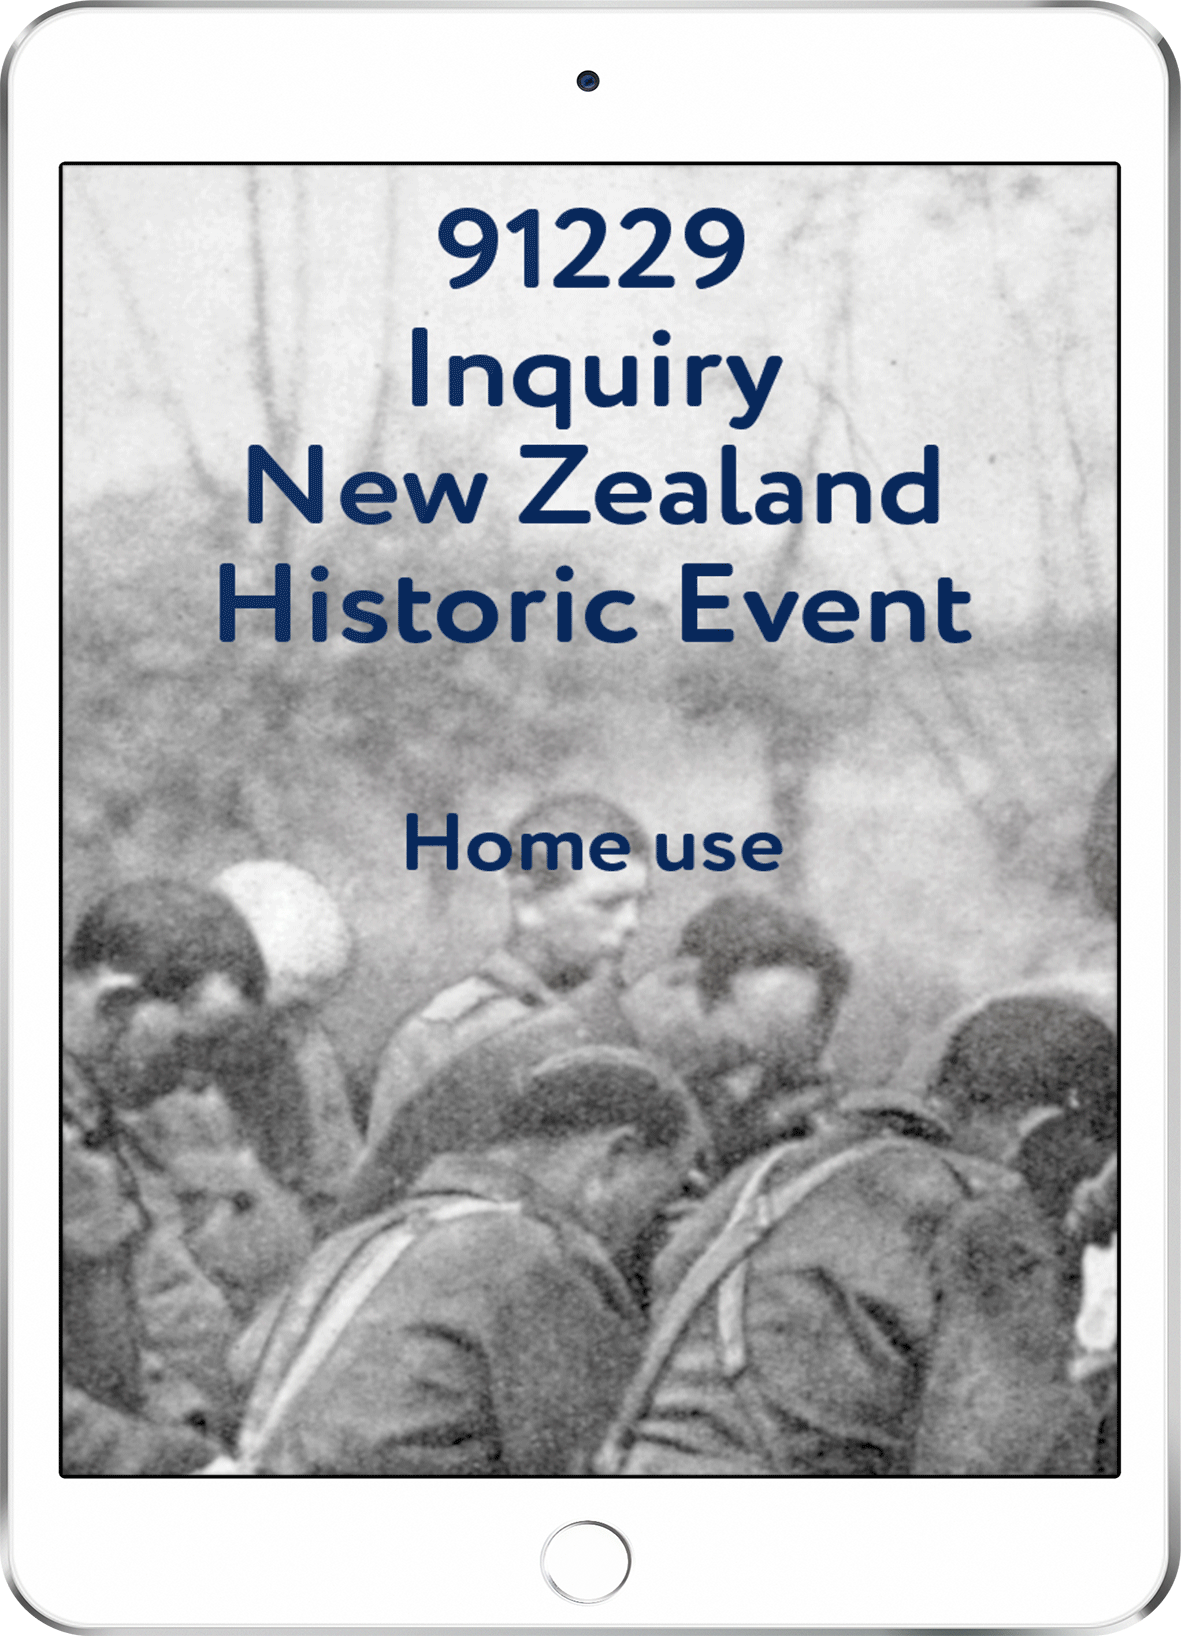 91229 Inquiry New Zealand Historic Event - Home Use